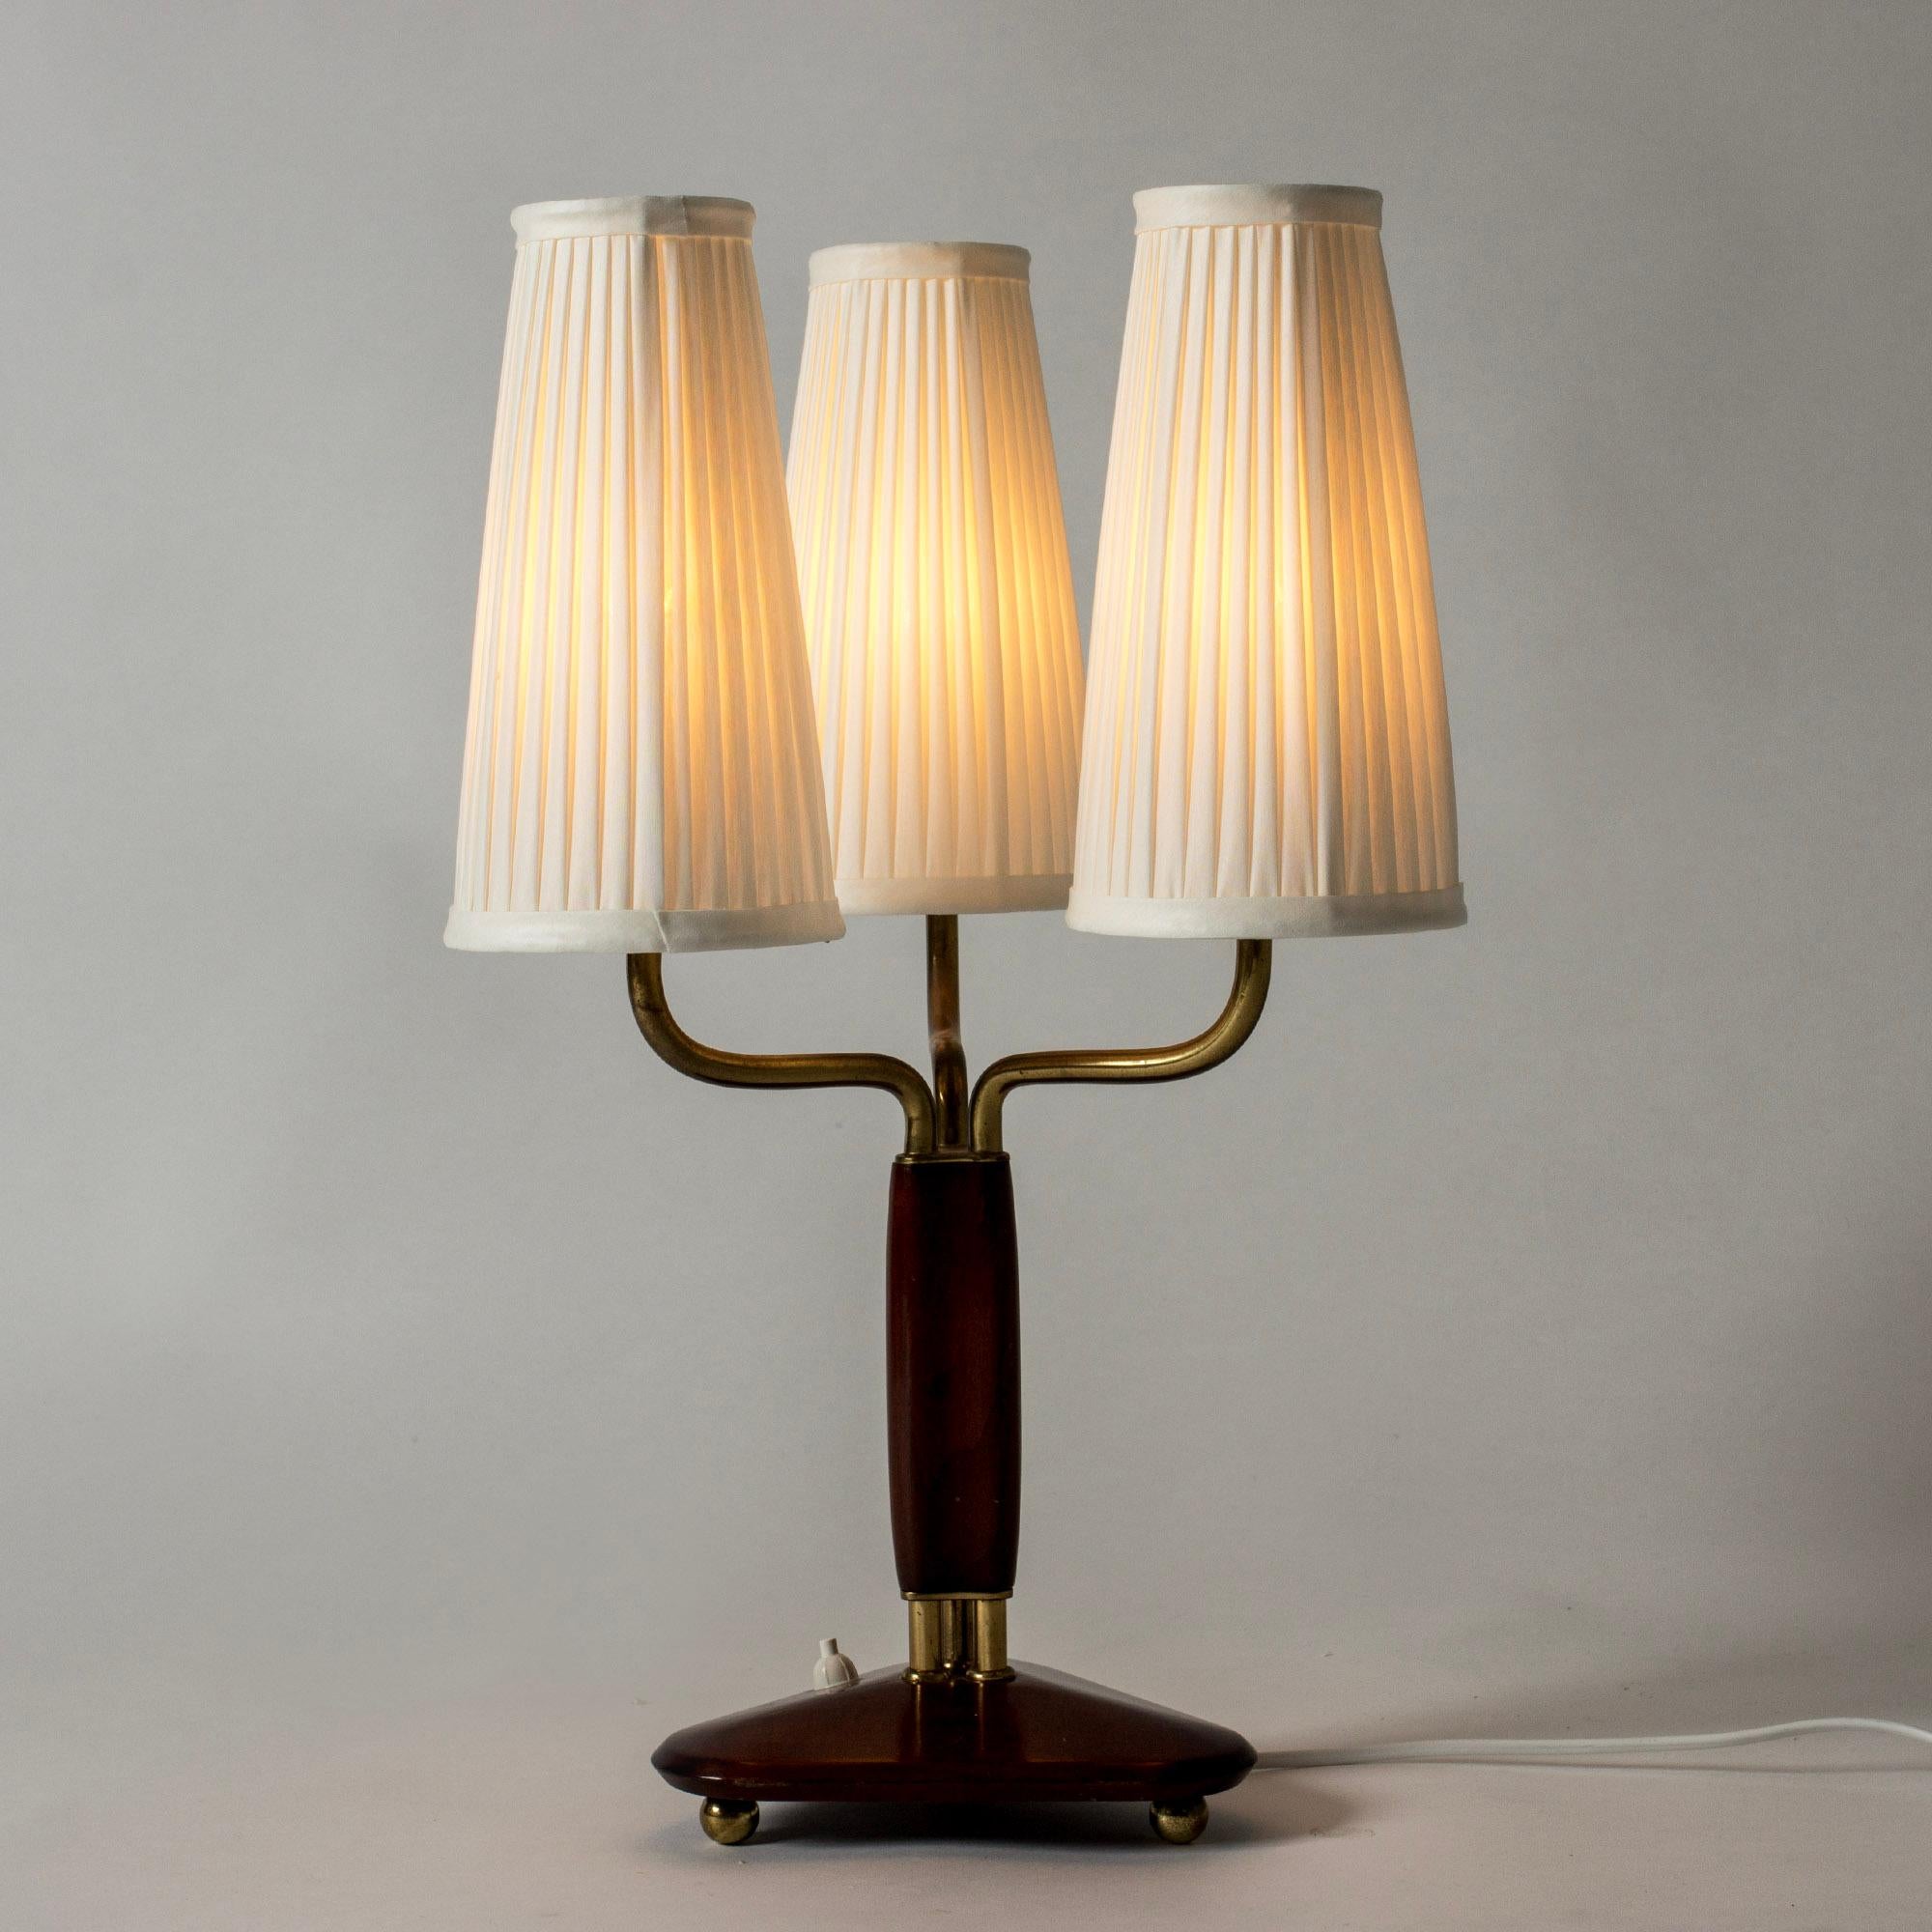 Swedish Scandinavian Modern Table Lamp by Carl-Axel Acking, Sweden, 1940s For Sale